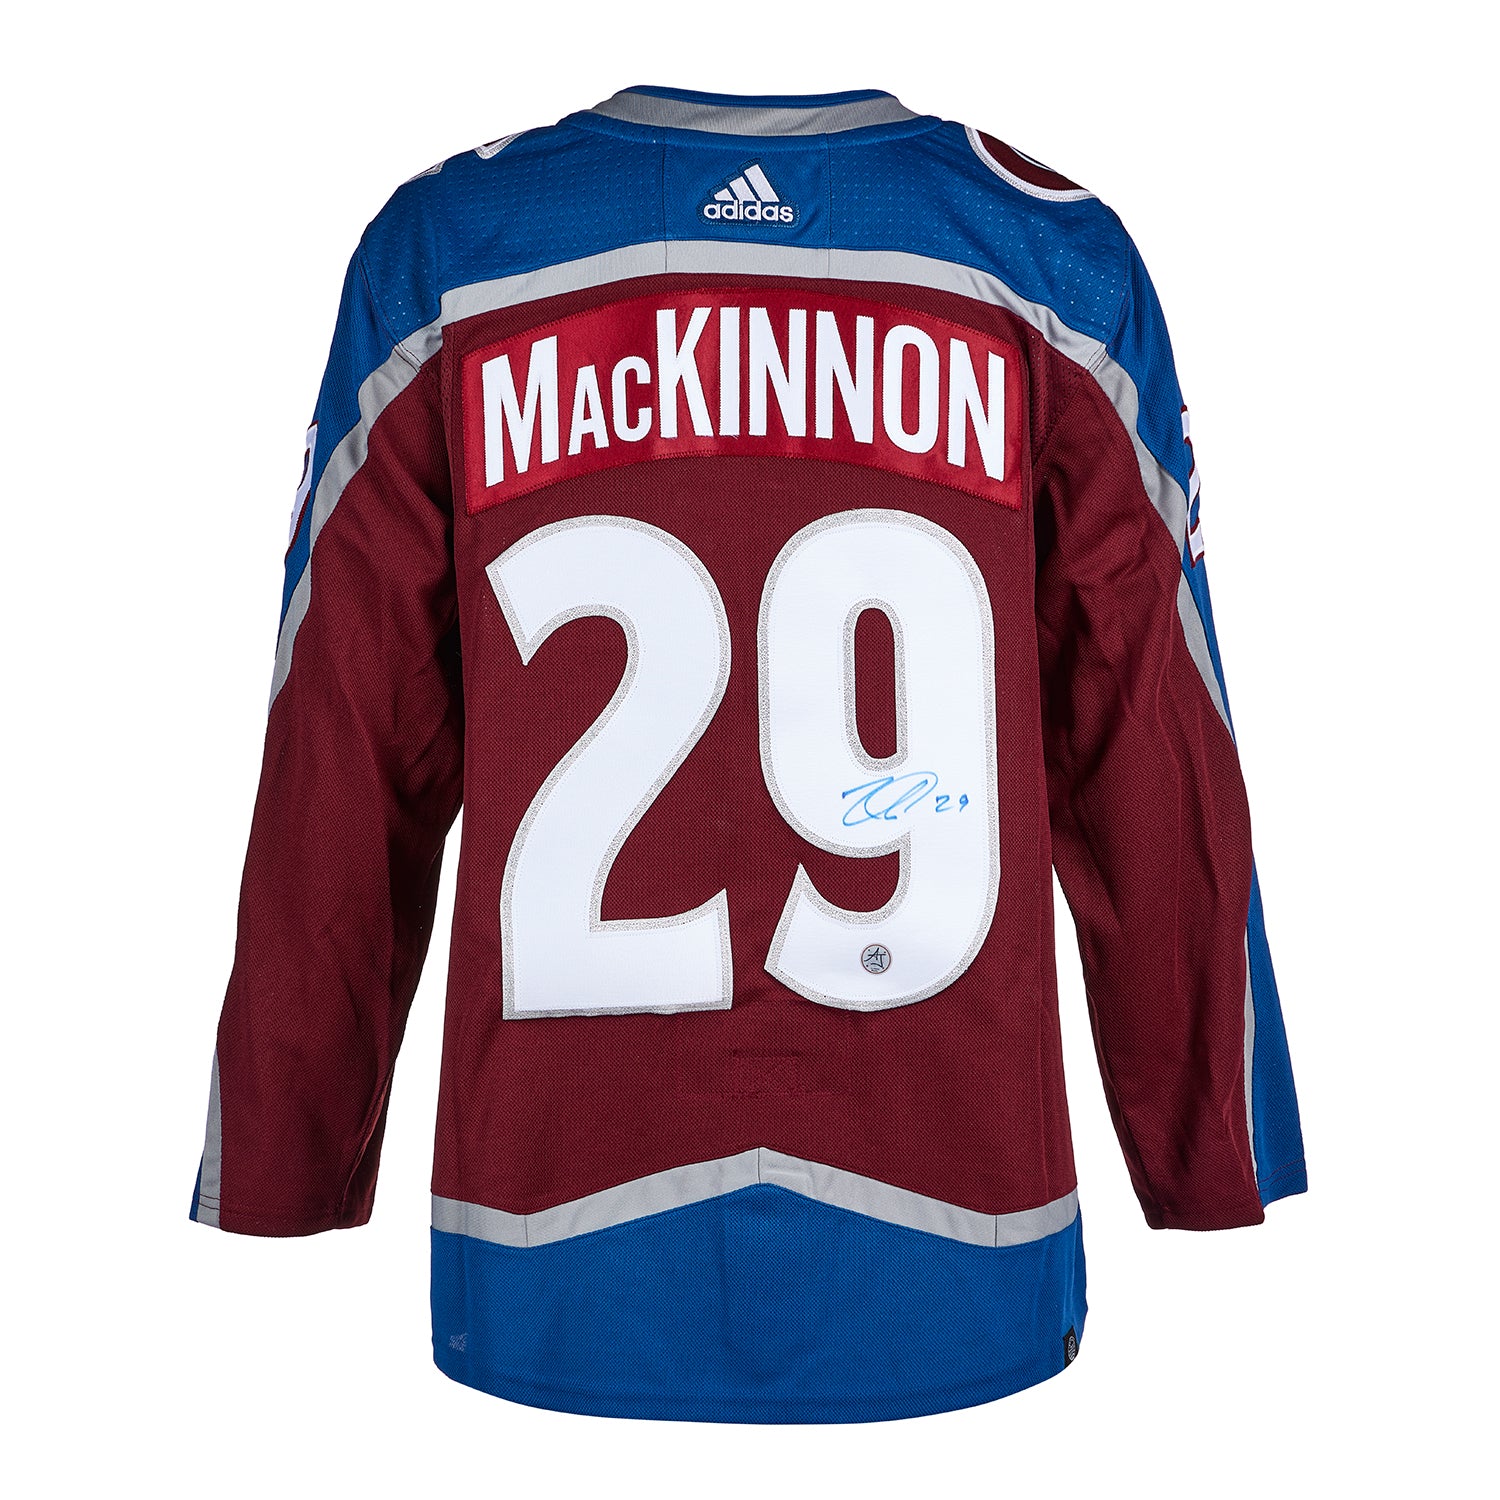 Nathan MacKinnon Colorado Avalanche Autographed 2020 NHL Stadium Series  Adidas Authentic Jersey - Limited Edition of 20